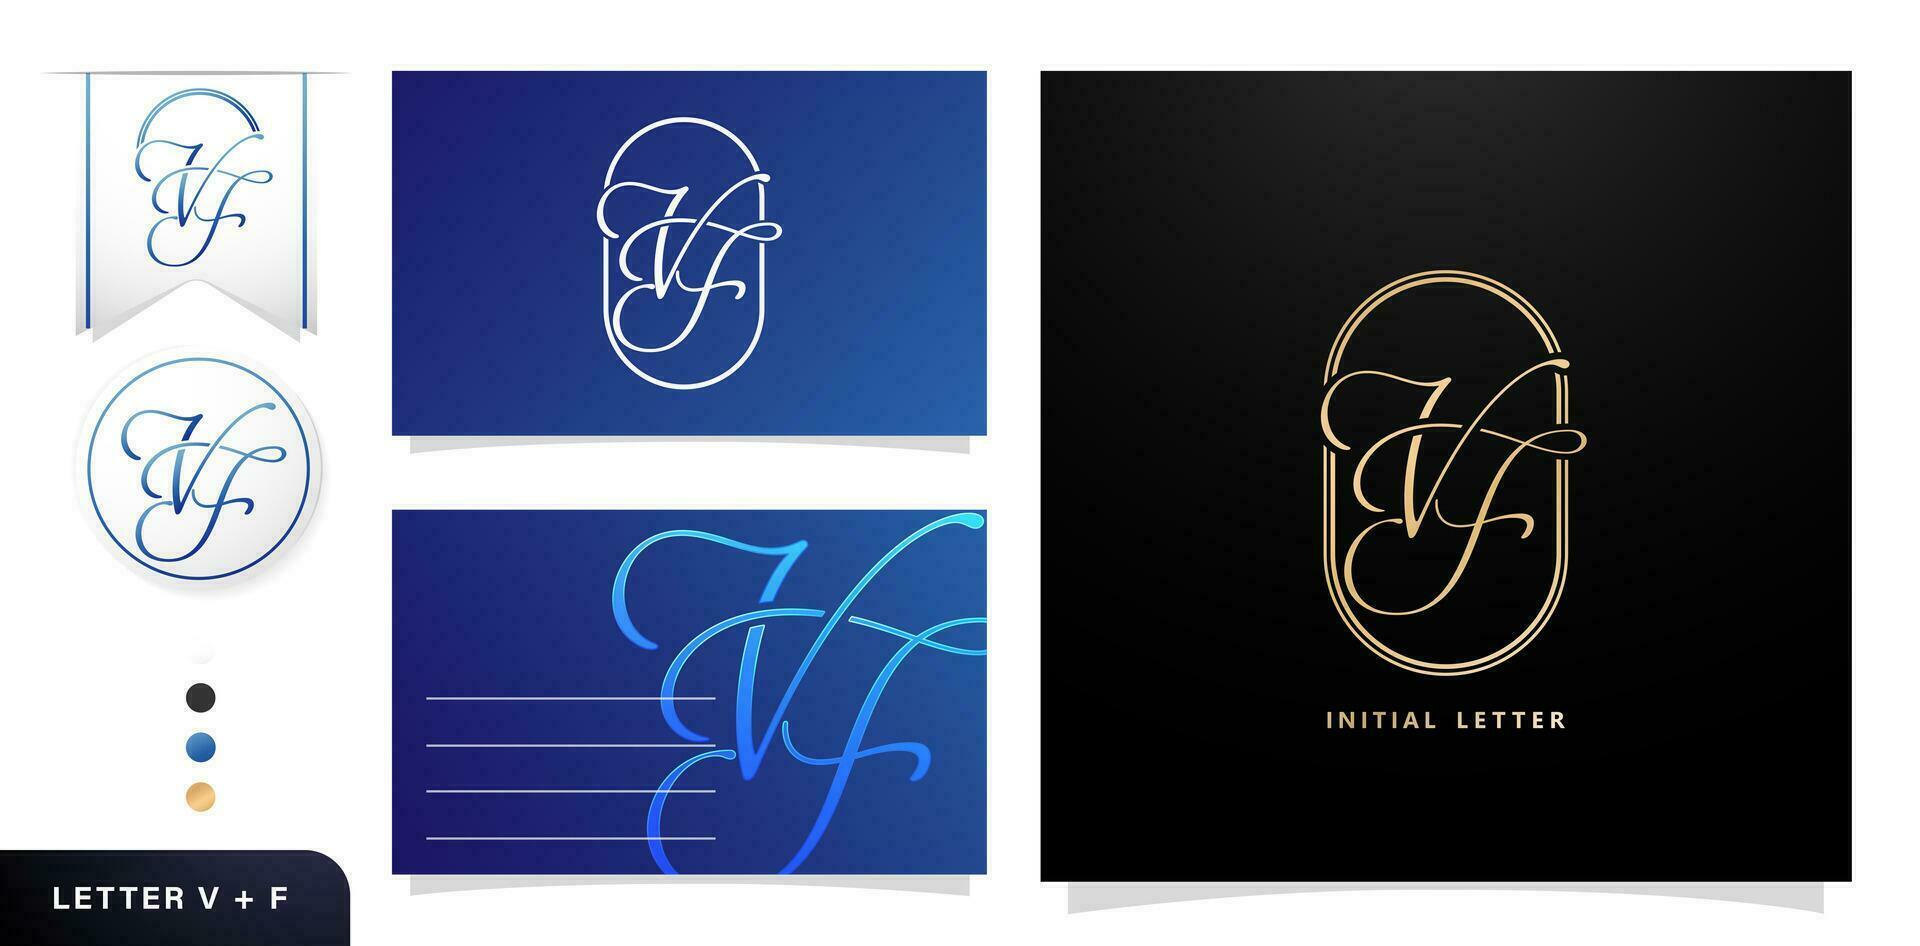 VF monogram letter Elegant line art initial logo design template for business cards templates, branding company identity, advertisement materials golden foil, collages prints, ads campaigns marketings vector